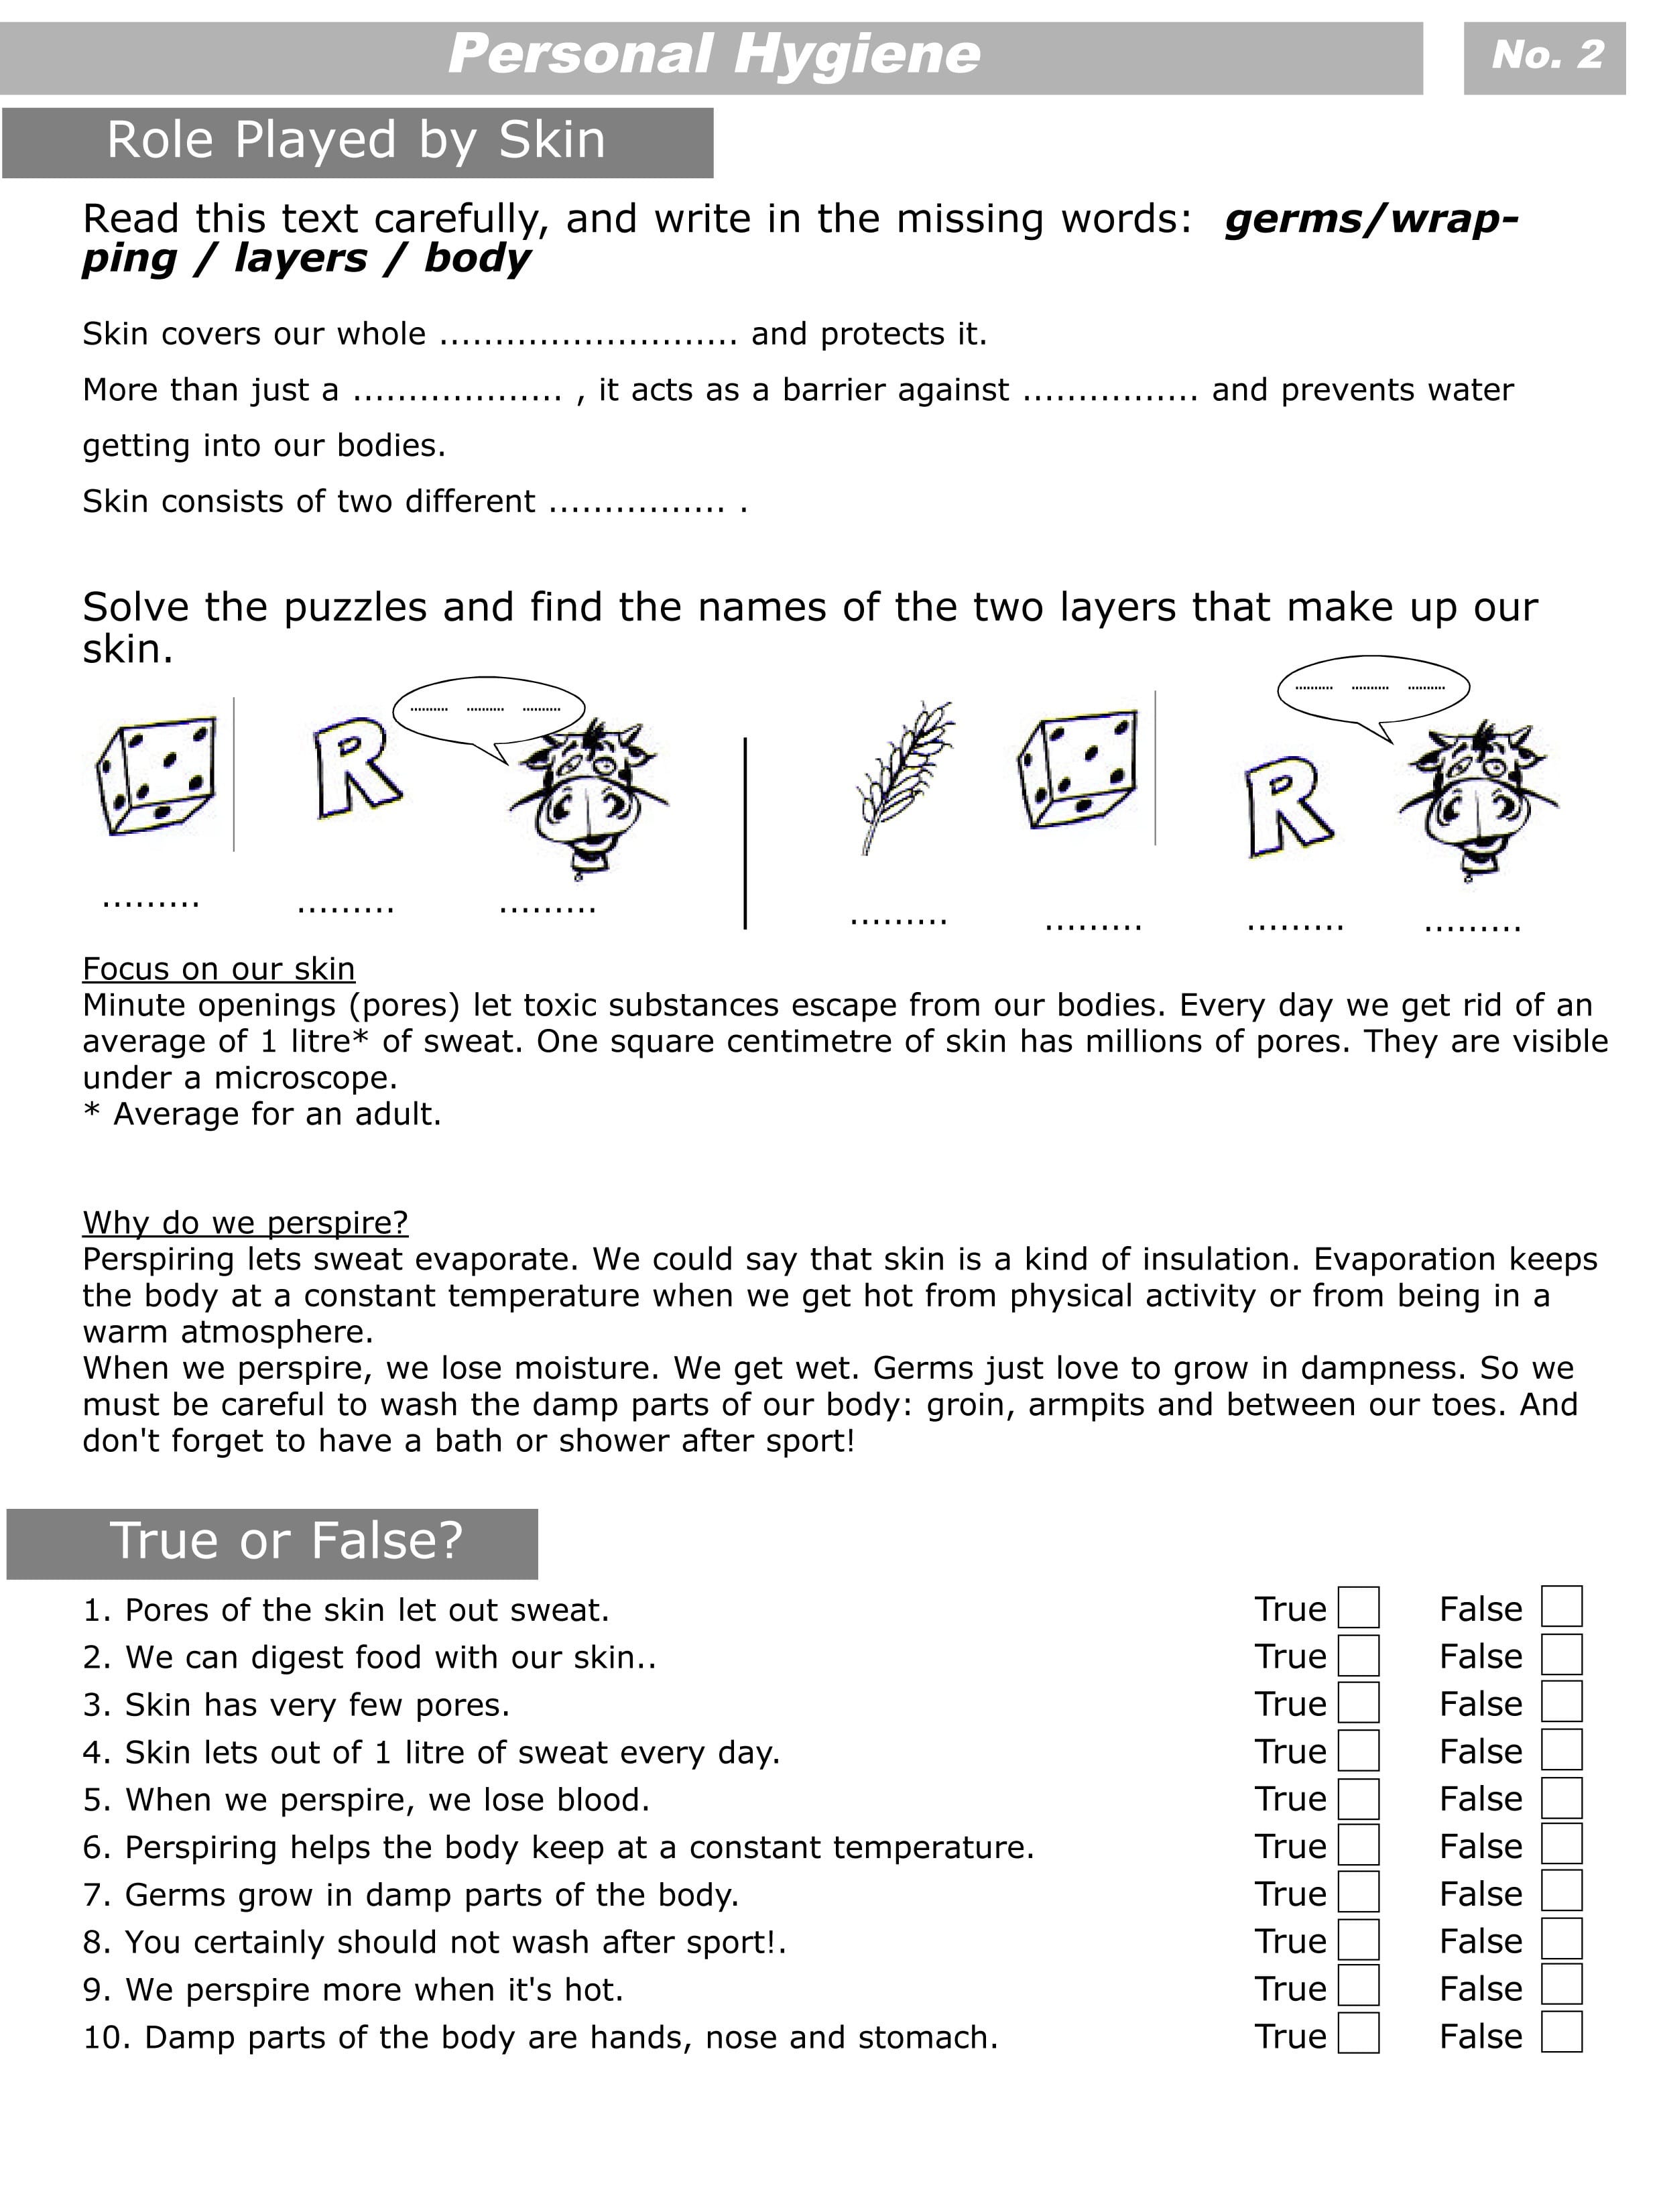 Personal Hygiene Worksheets For Kids Level 2 2  Personal